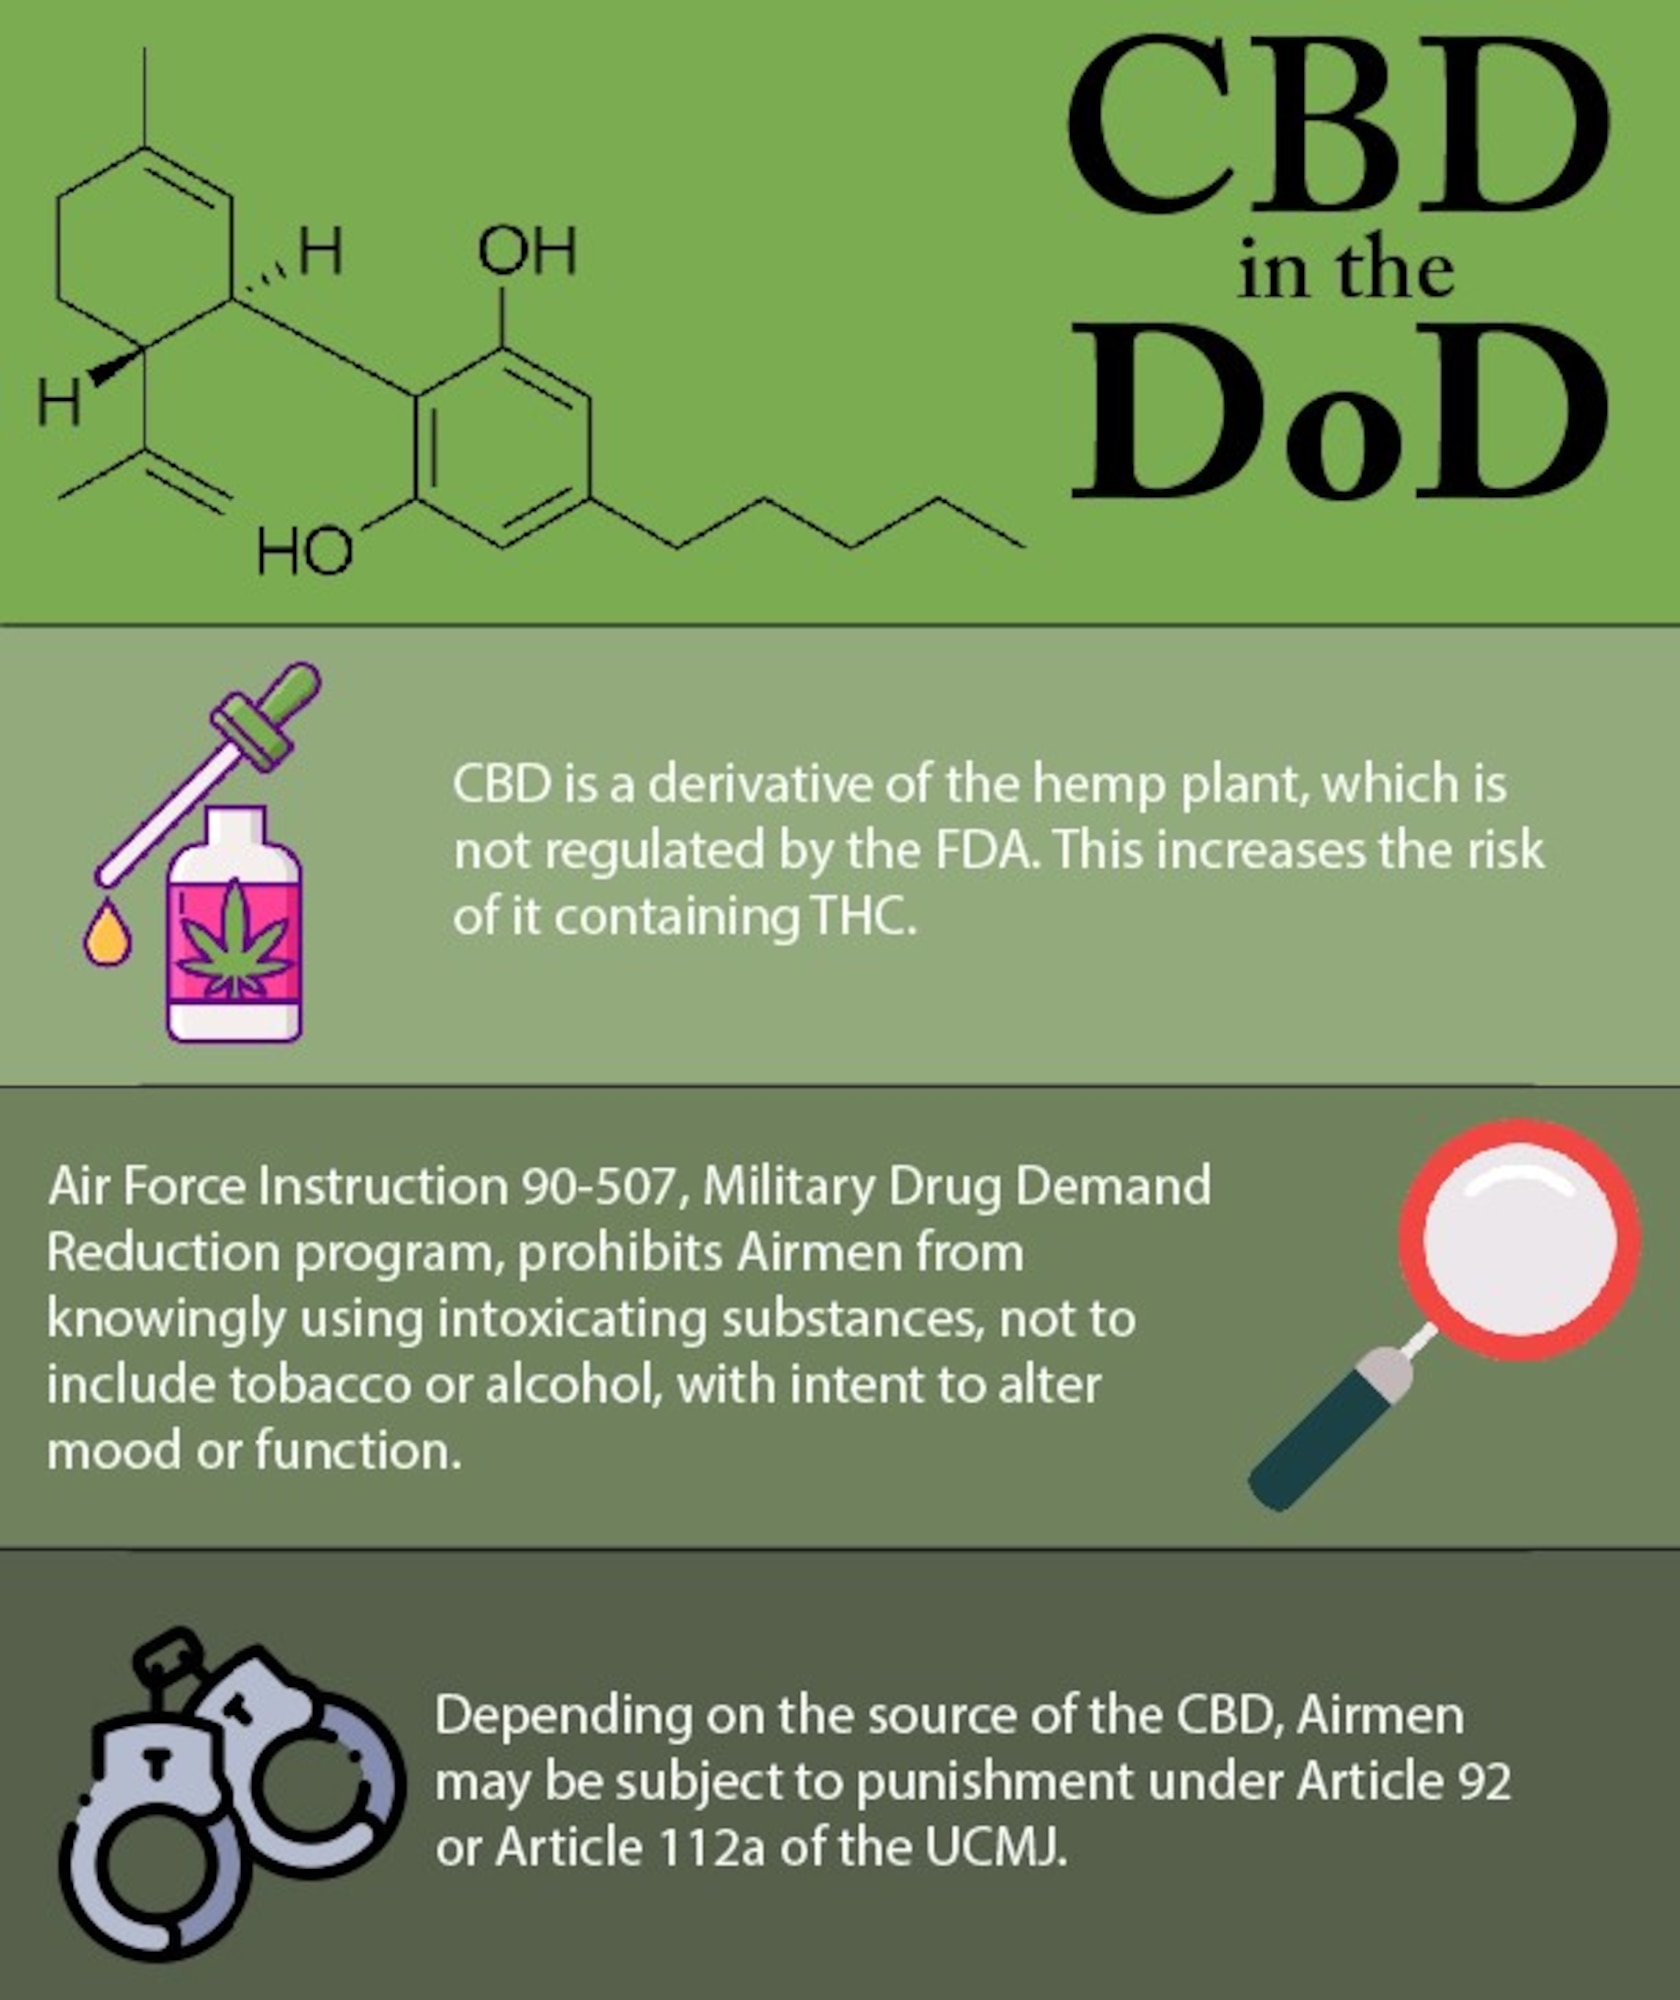 Graphic depicting that military members are prohibited from using CBD (orally, inhaled, intravenously, or through other means), because of its Schedule I status and ability to interfere with the Air Force Drug Testing Program. (U.S. Air Force graphic by Senior Airman Braydon Williams)